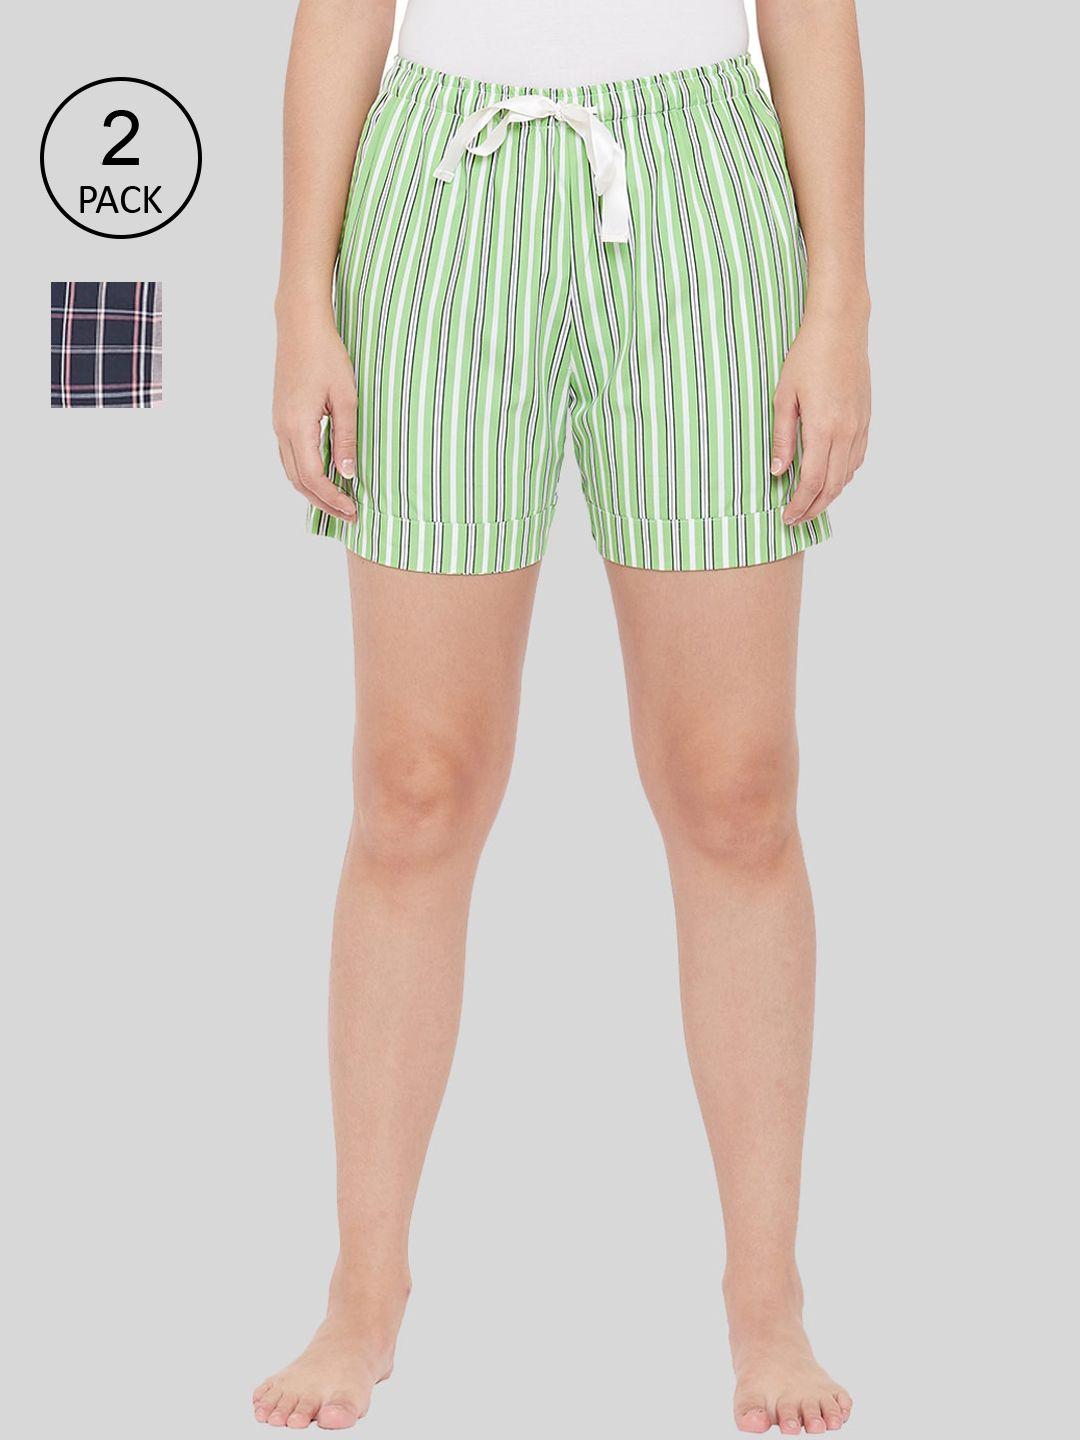 style shoes women green & navy blue striped checked shorts pack of 2